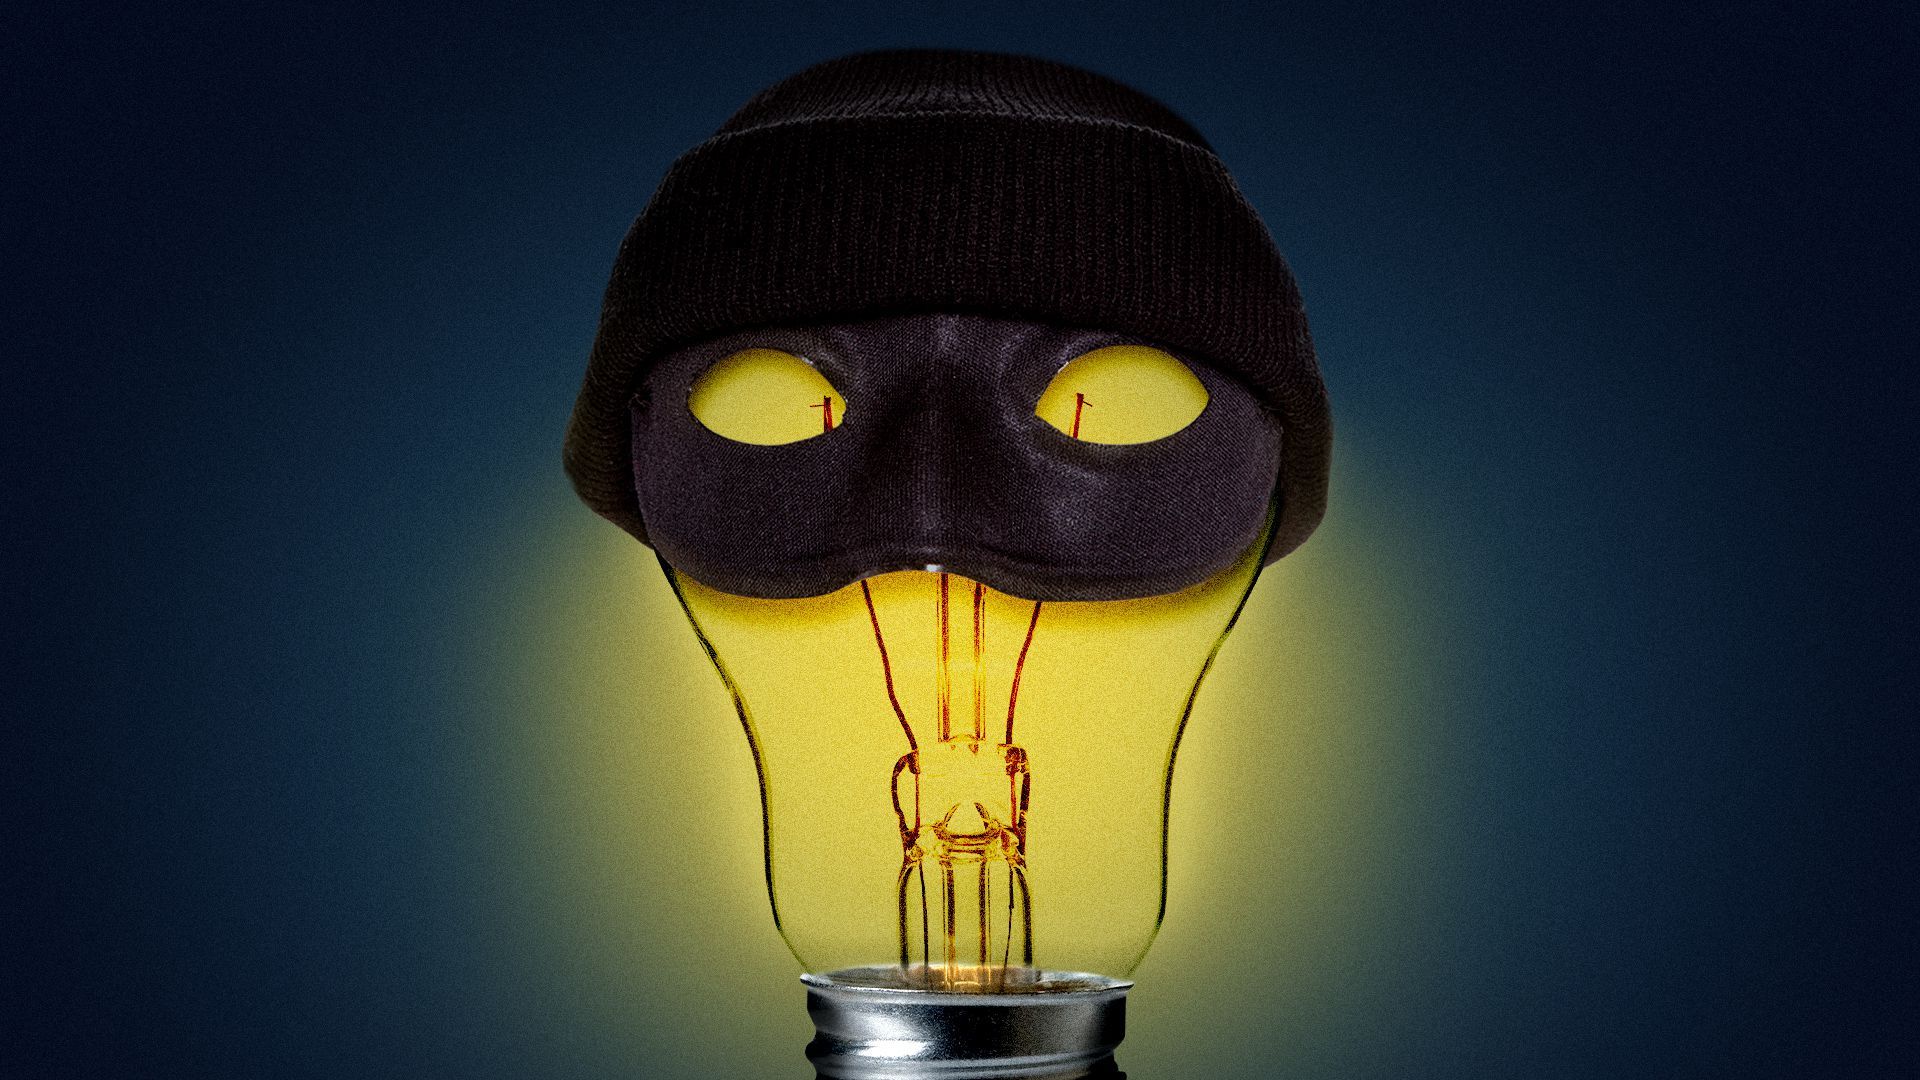 Illustration of a lightbulb with a robber mask and cap.